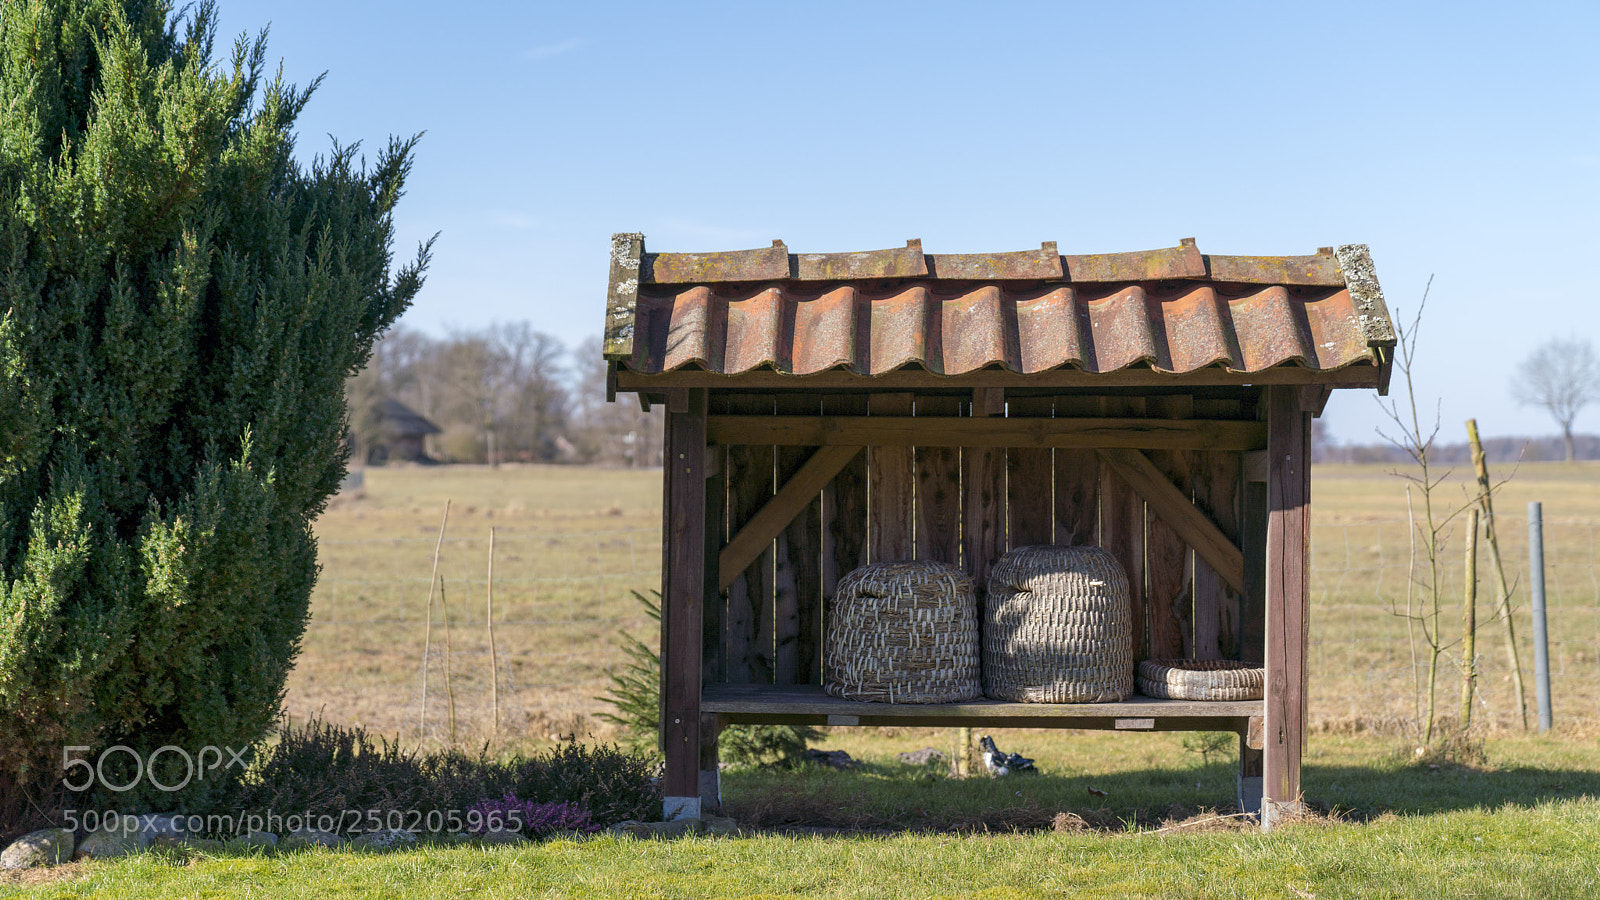 Sony a7R III sample photo. Classic beehive shelter photography